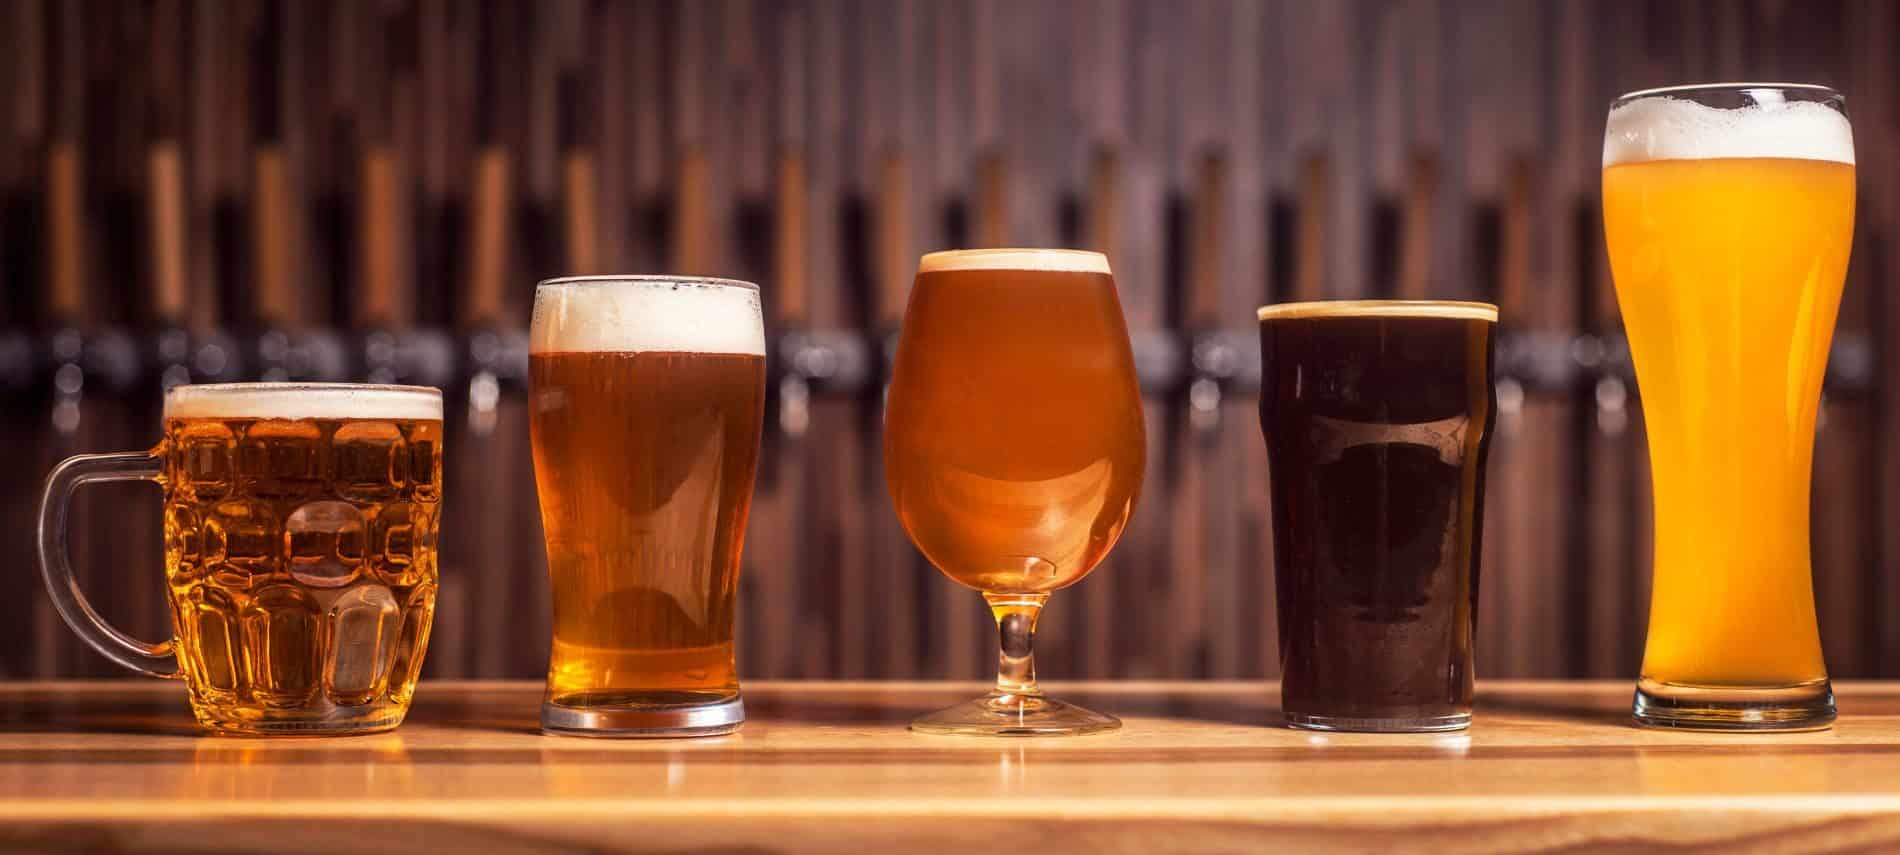 Five different craft beers in unique glasses lined up on a bar counter